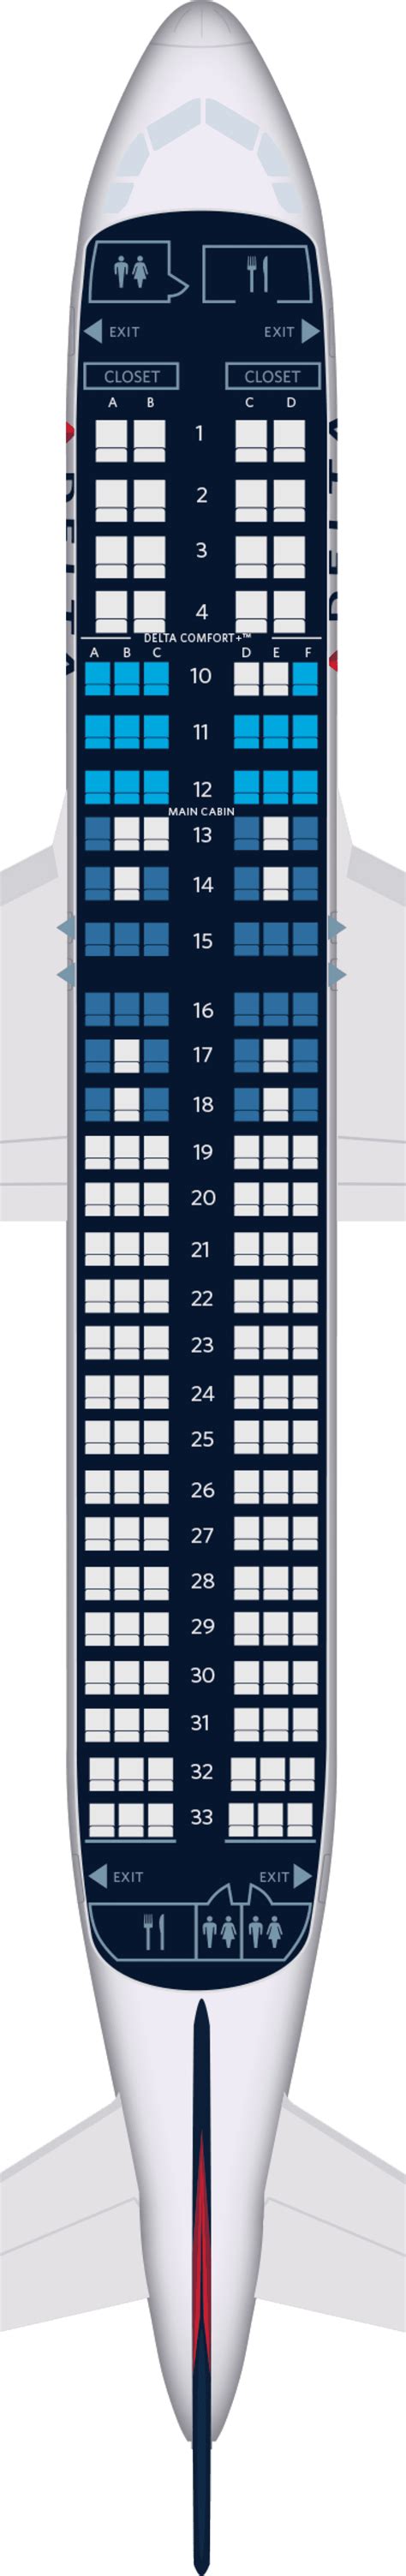  Seat 11 F is a standard Economy Class seat that JetBlue designates as an "Even More Space" seat. This seat offers an extra 5 inches of inches of legroom compared to Core seats. This seat is missing the armrest which may be uncomfortable. 12 A: None: No Power: Seat 12 A is an Economy Class seat that has a misaligned window. 12 B: None: No Power . 